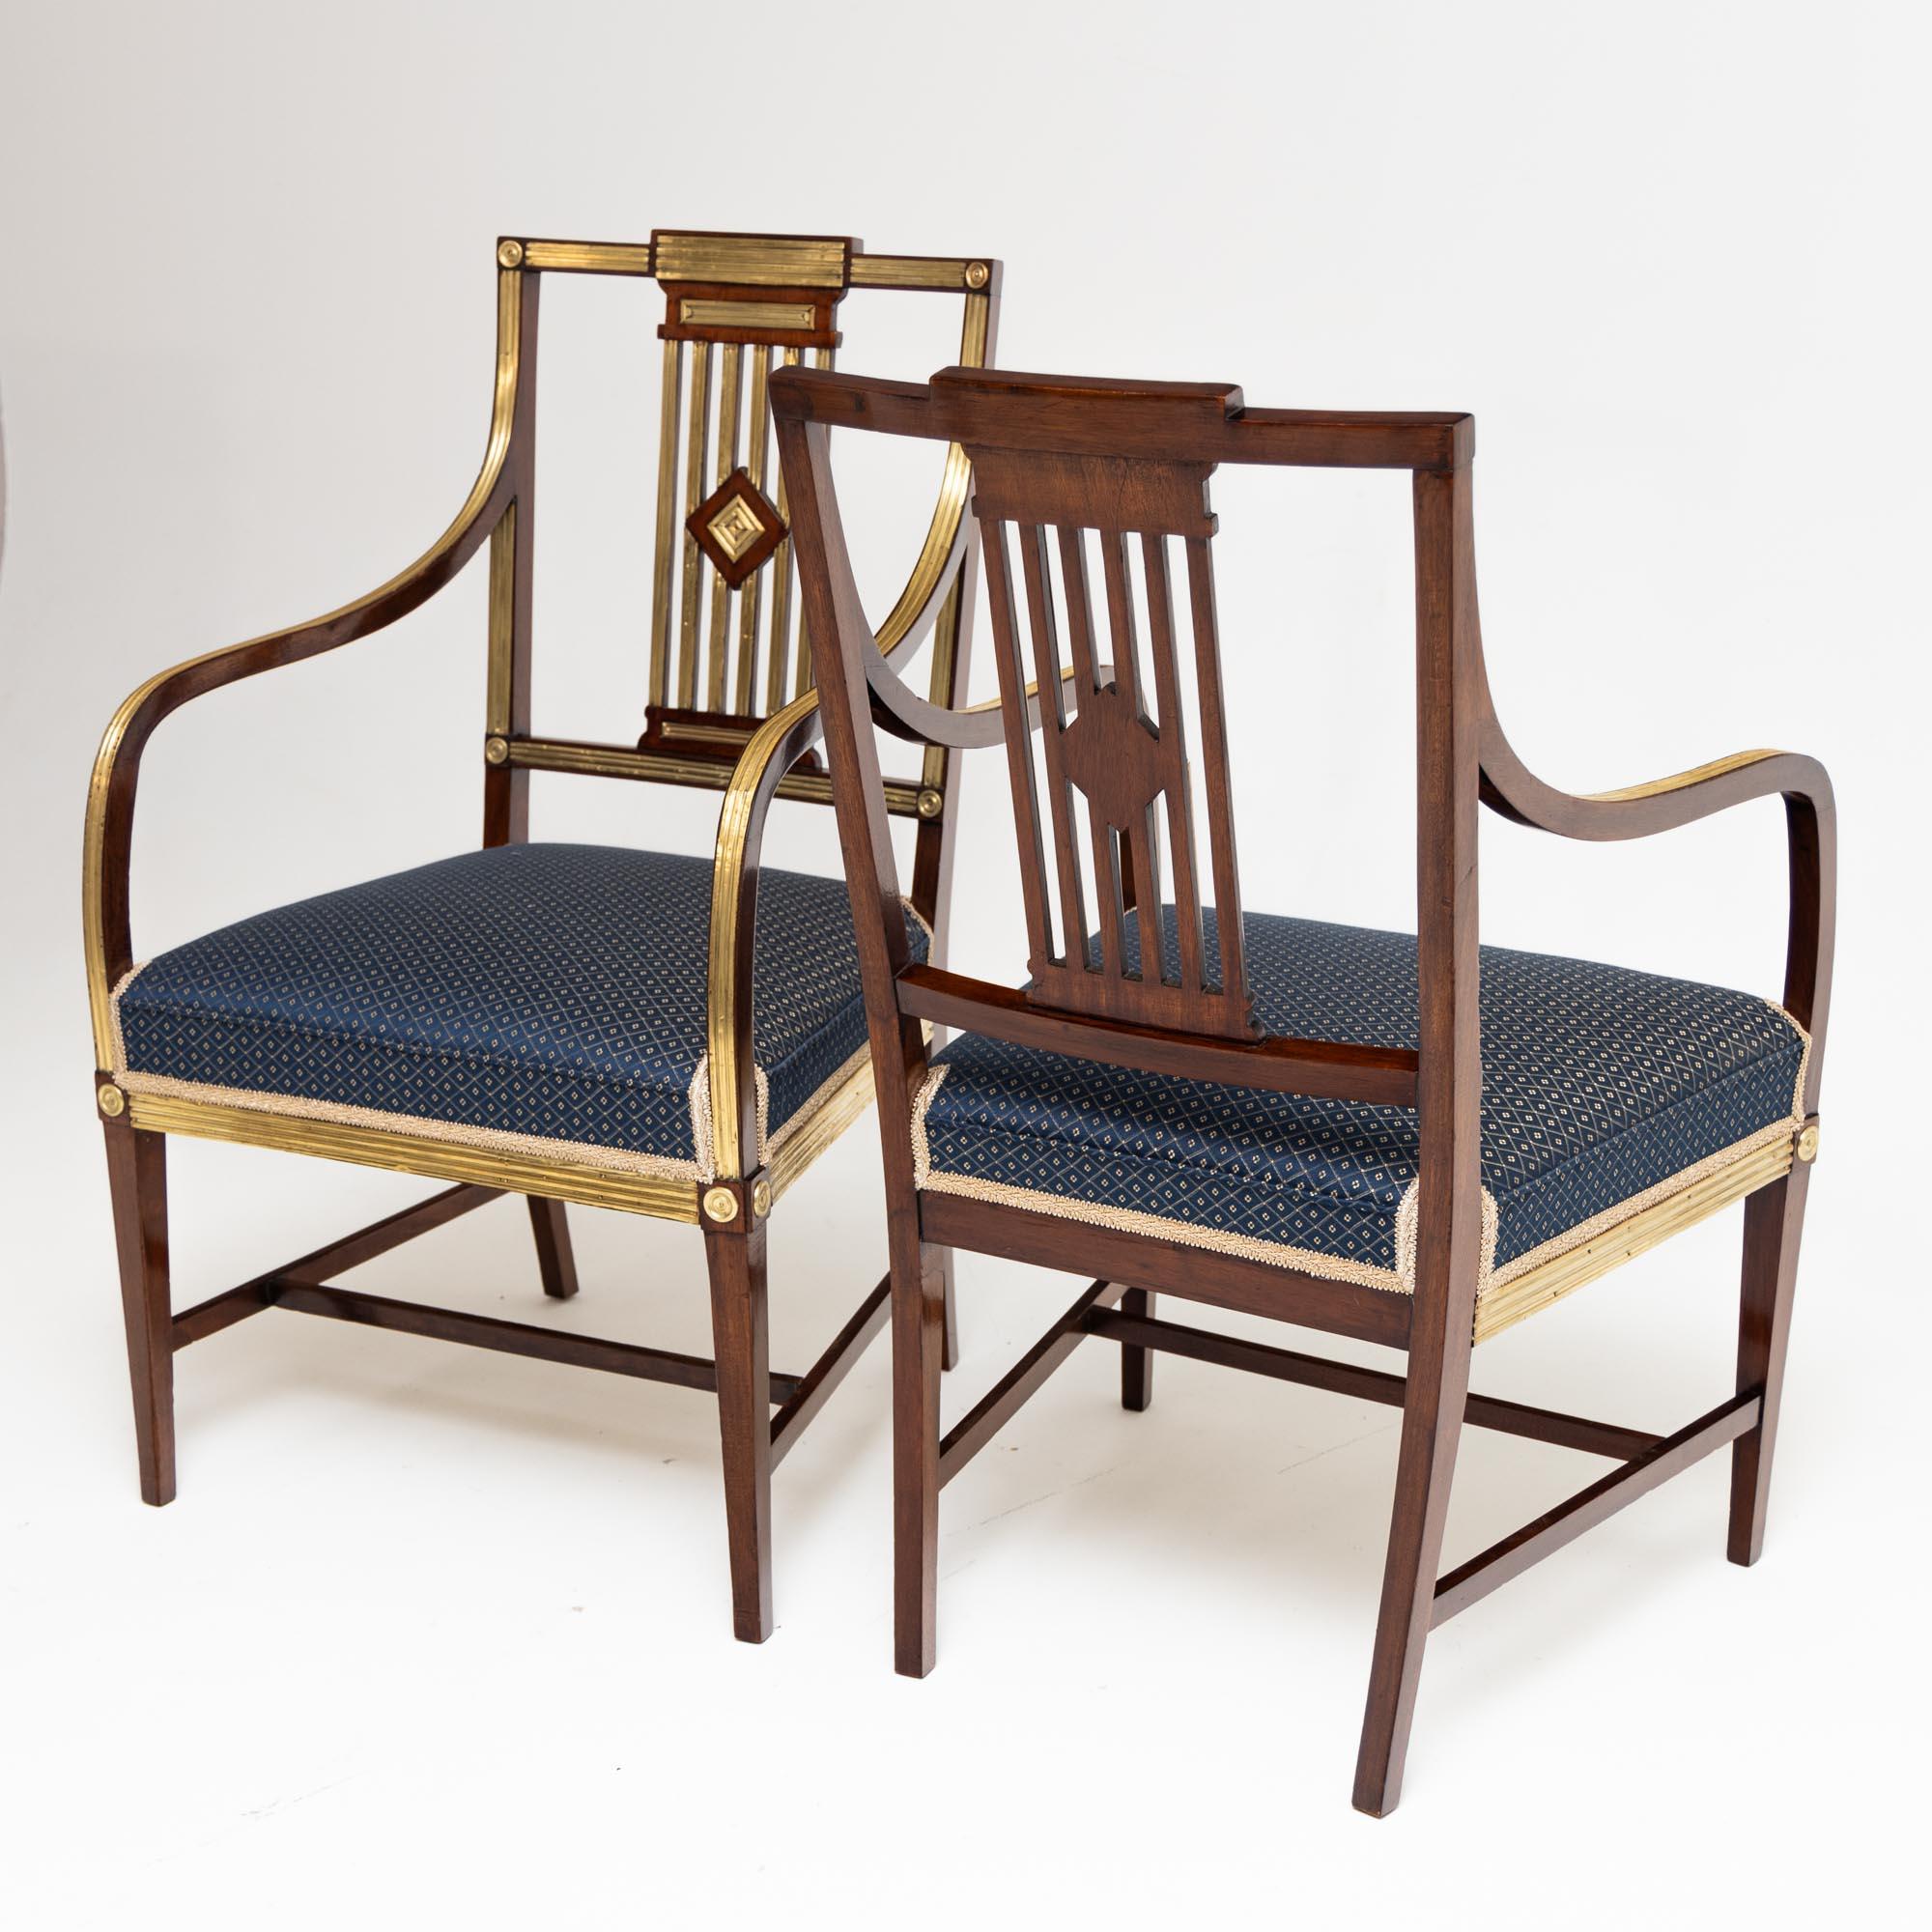 Pair of Neoclassical Dining Room Chairs, Brass, Baltic States, Late 18th Century 3